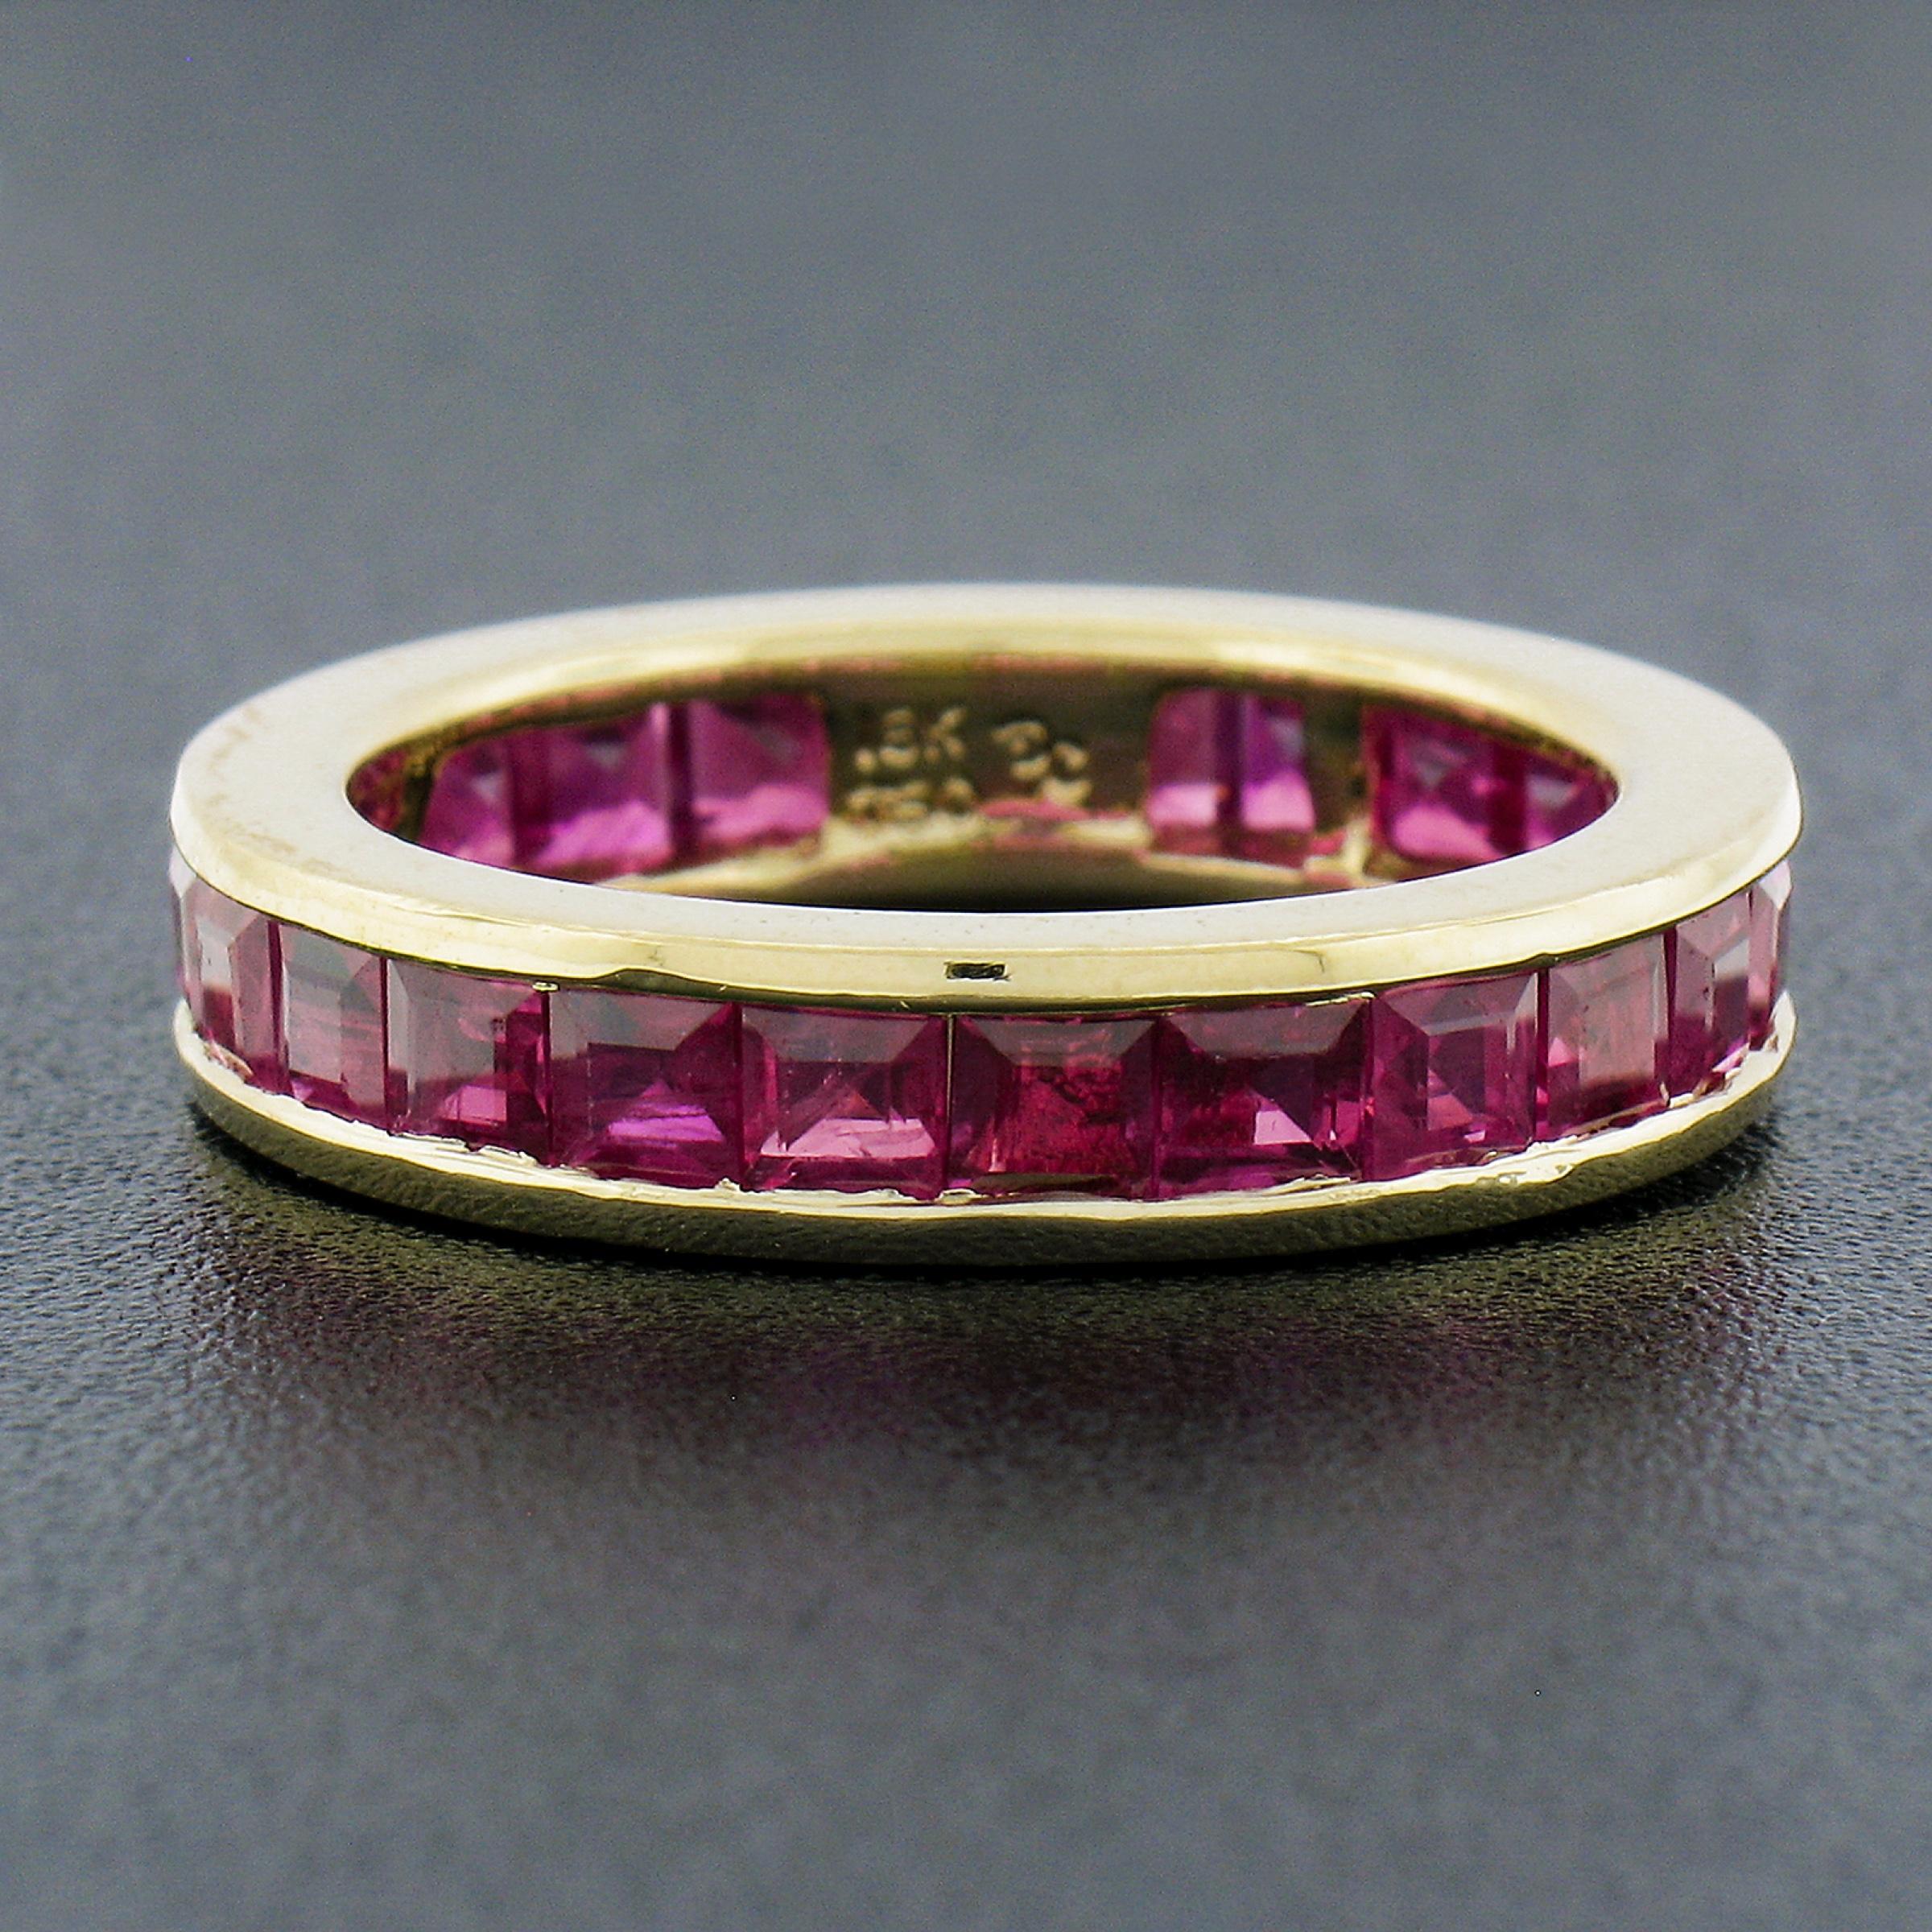 Substantial natural Bruma Ruby Eternity band/ring. The ring comes with a GIA certification for the rubies. Very pleasant ring in person. Enjoy!

--Stone(s):--
(24) Natural Genuine Burma Rubies - Square Step Cut - Channel Set - Purplish Red Color -